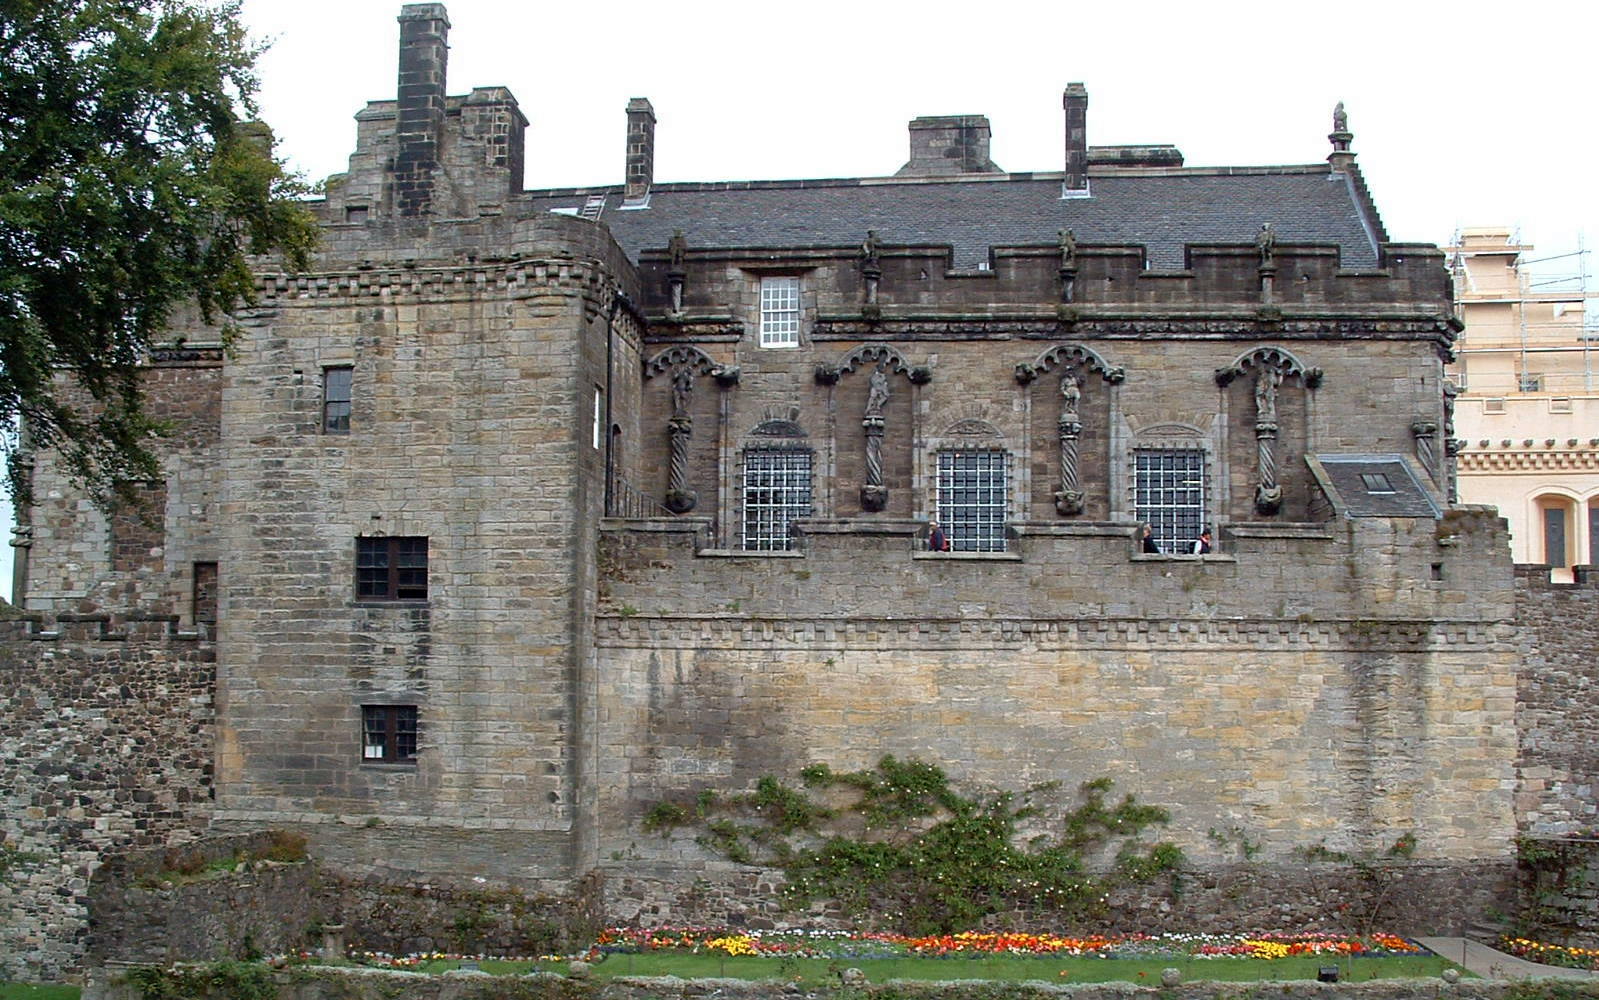 The Royal Palace from Queen Anne's Garden. (2003)